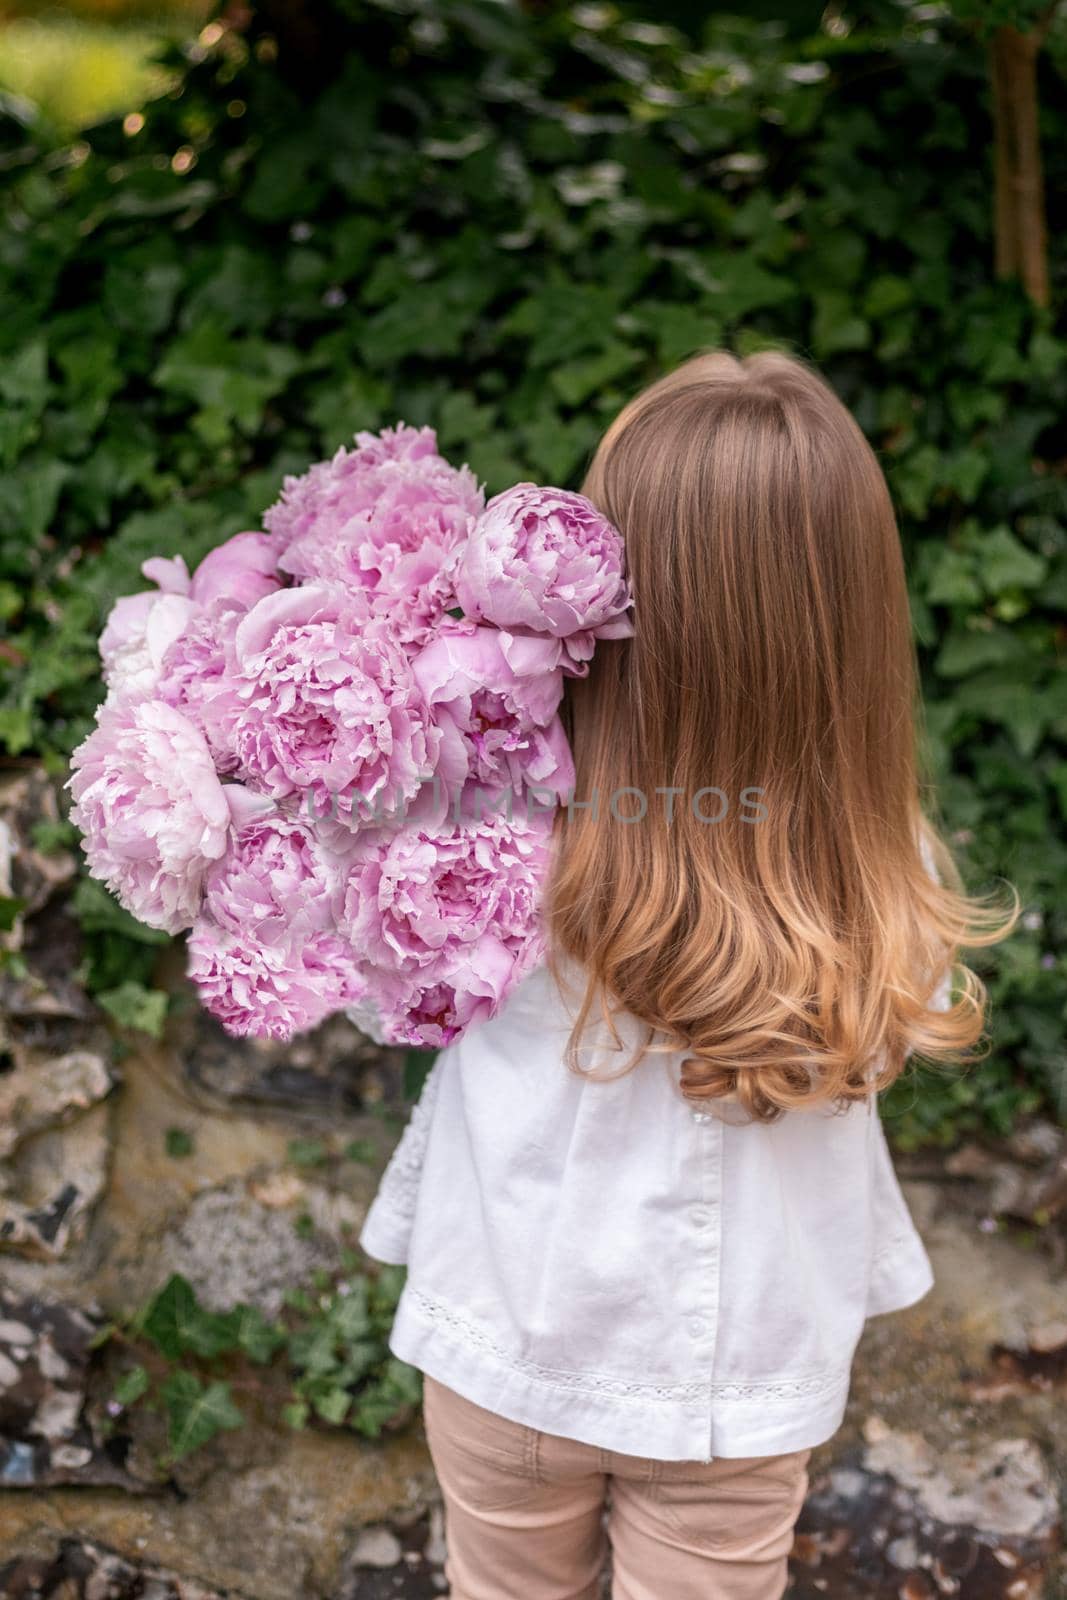 Girl holding fresh peonies bouquet